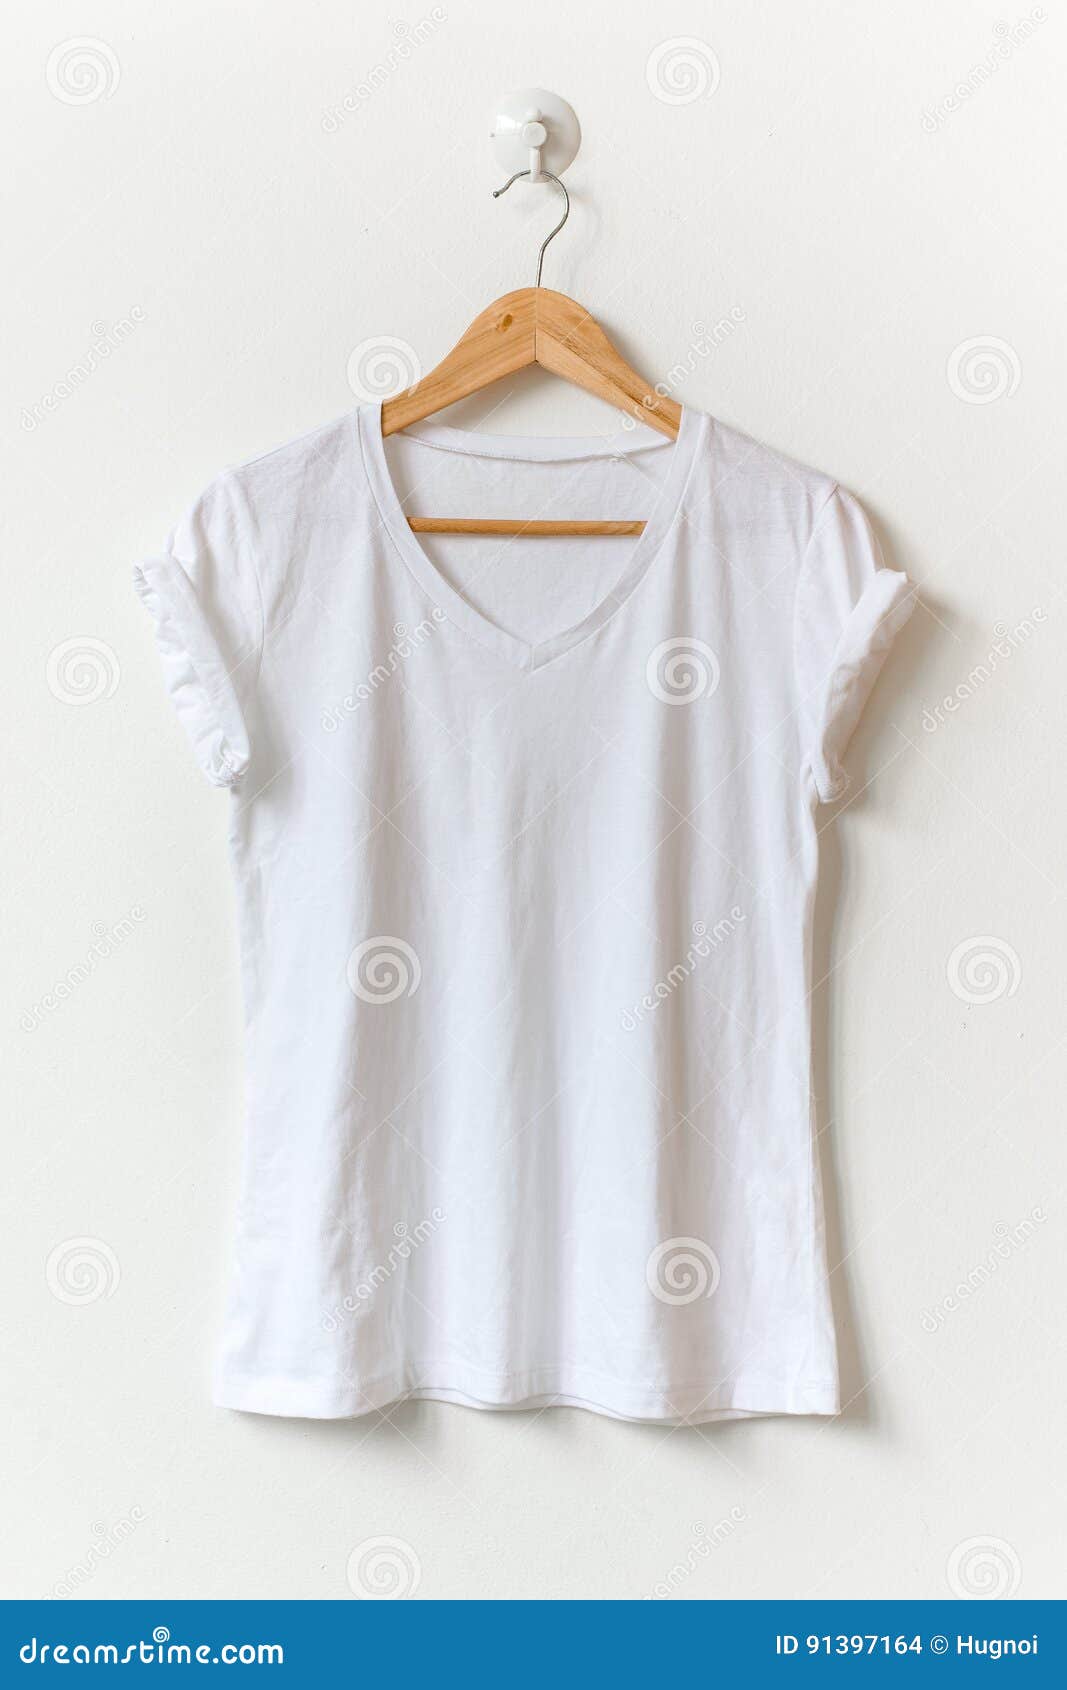 White t-shirt stock photo. Image of advertisement, clothes - 91397164